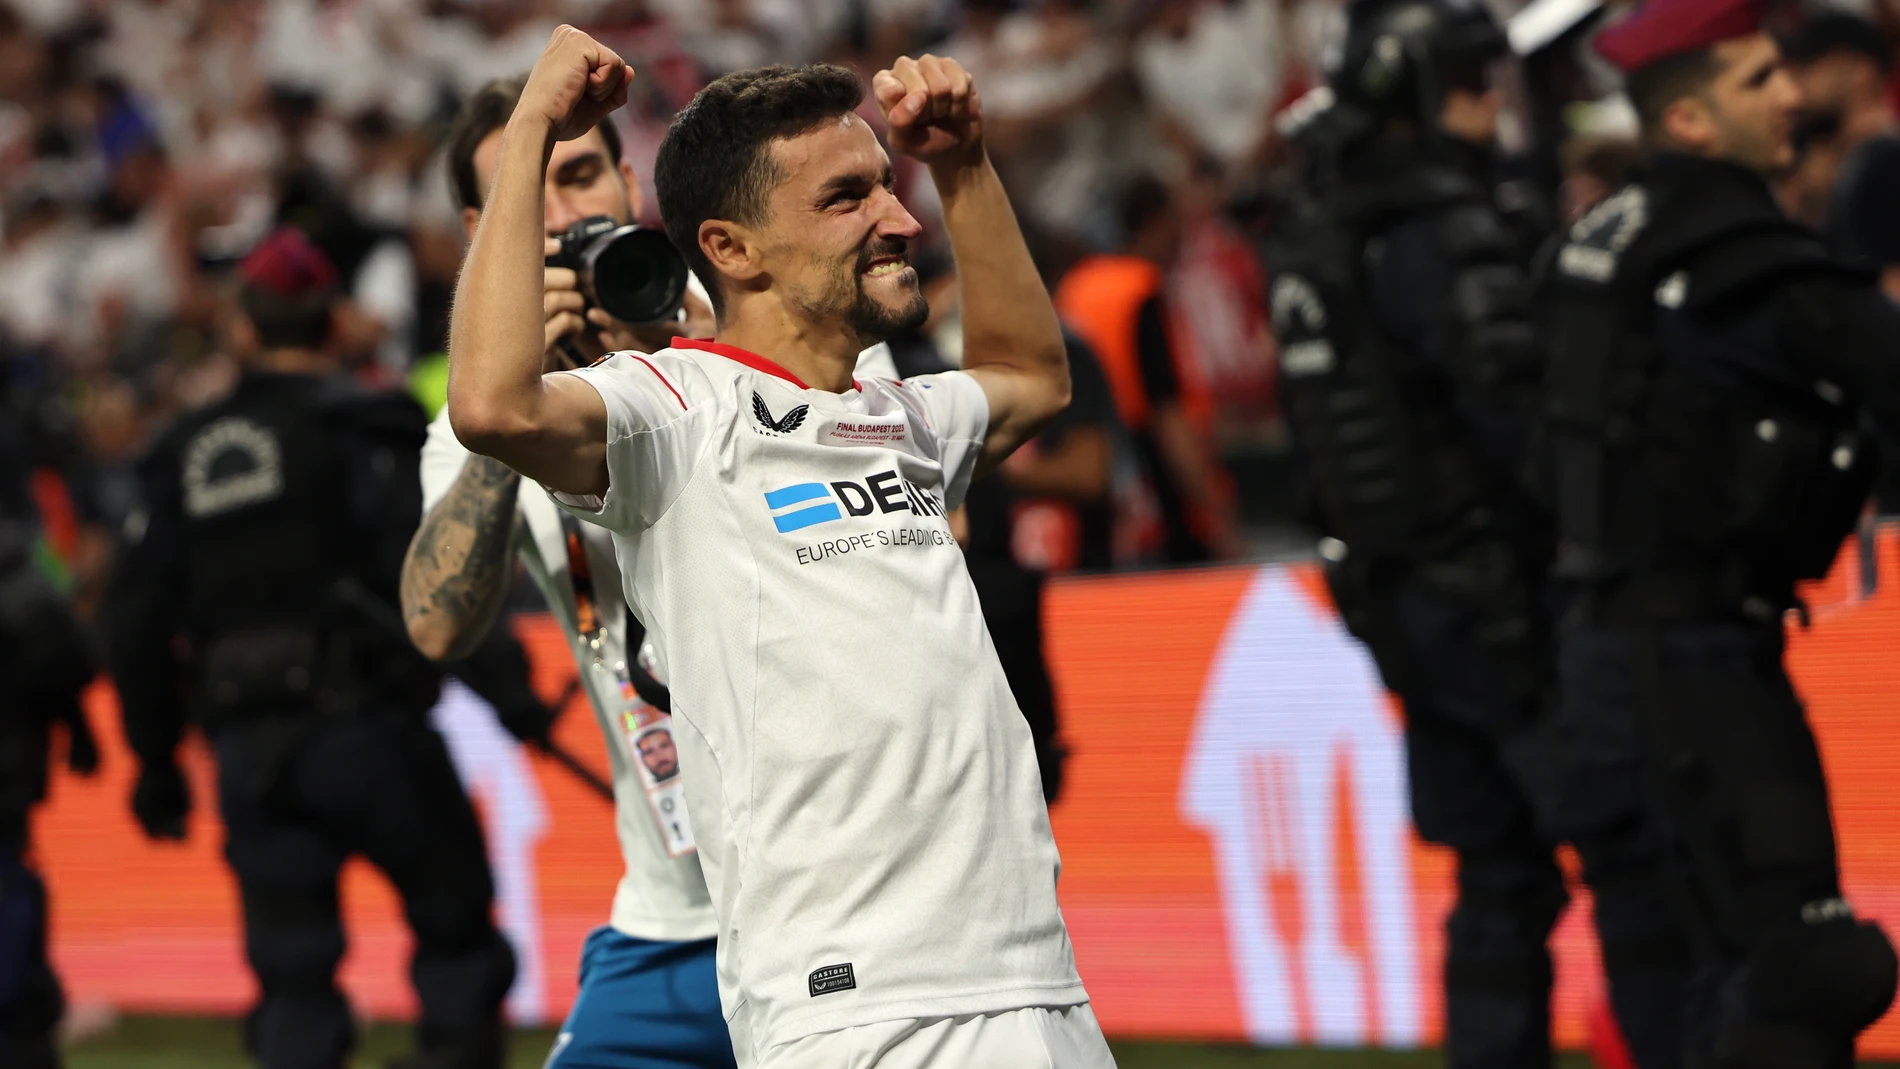 Budapest (Hungary), 31/05/2023.- Jesus Navas of Sevilla celebrates after winning the penalty shootout in the UEFA Europa League final between Sevilla FC and AS Roma, in Budapest, Hungary, 01 June 2023. Sevilla won the final with 4-1 on penalties. (Hungría) EFE/EPA/ANNA SZILAGYI 